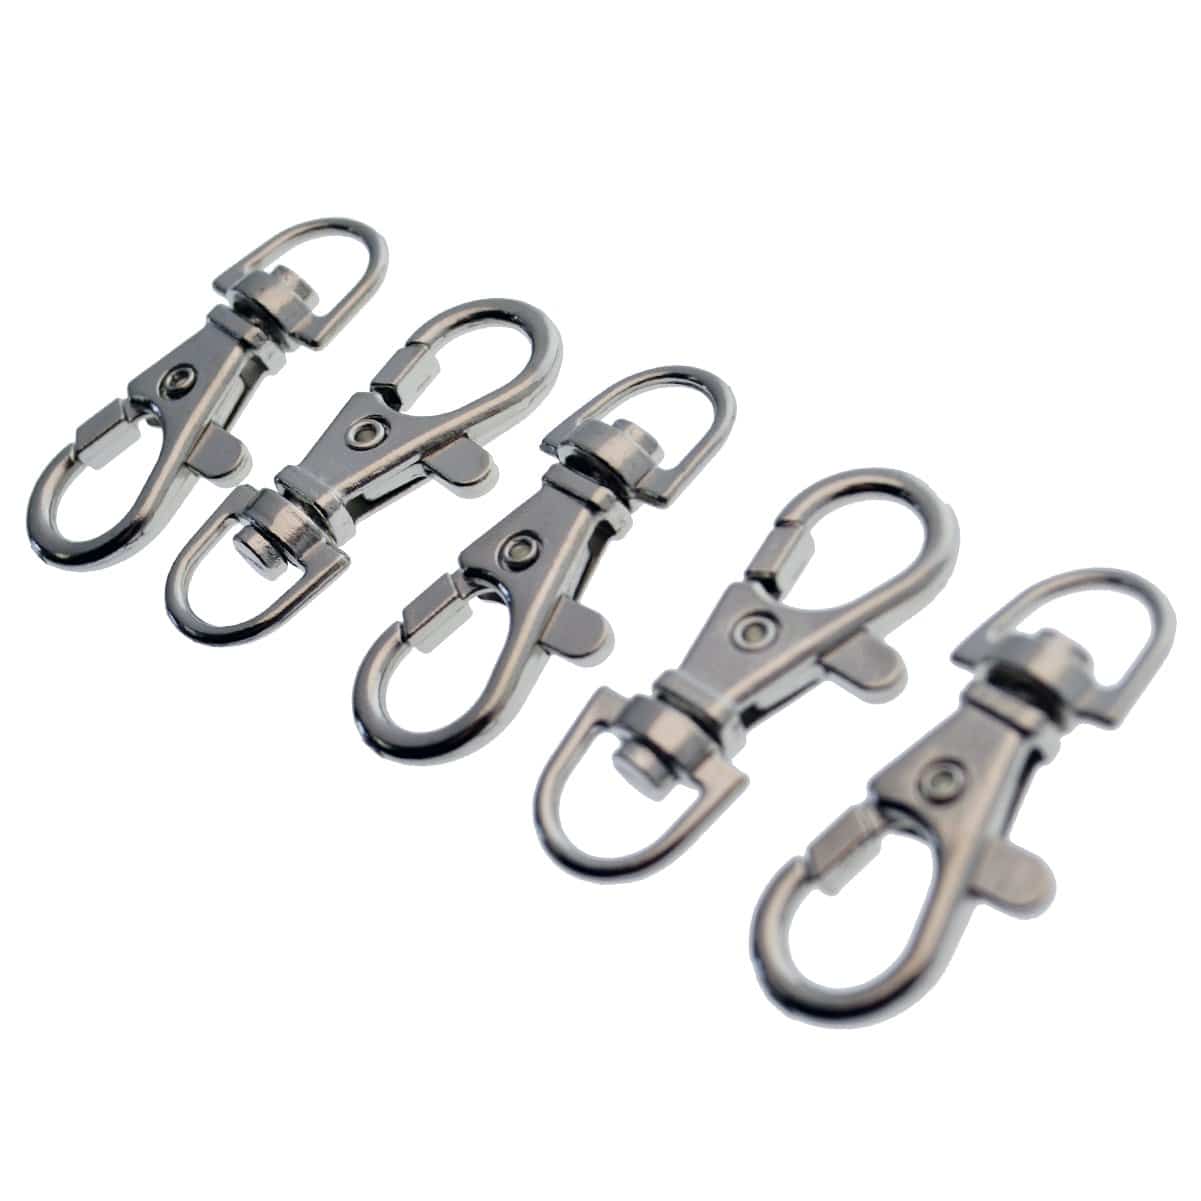 Swivel D Ring Snap Plastic Buckles for Dof Leash and Bag Straps